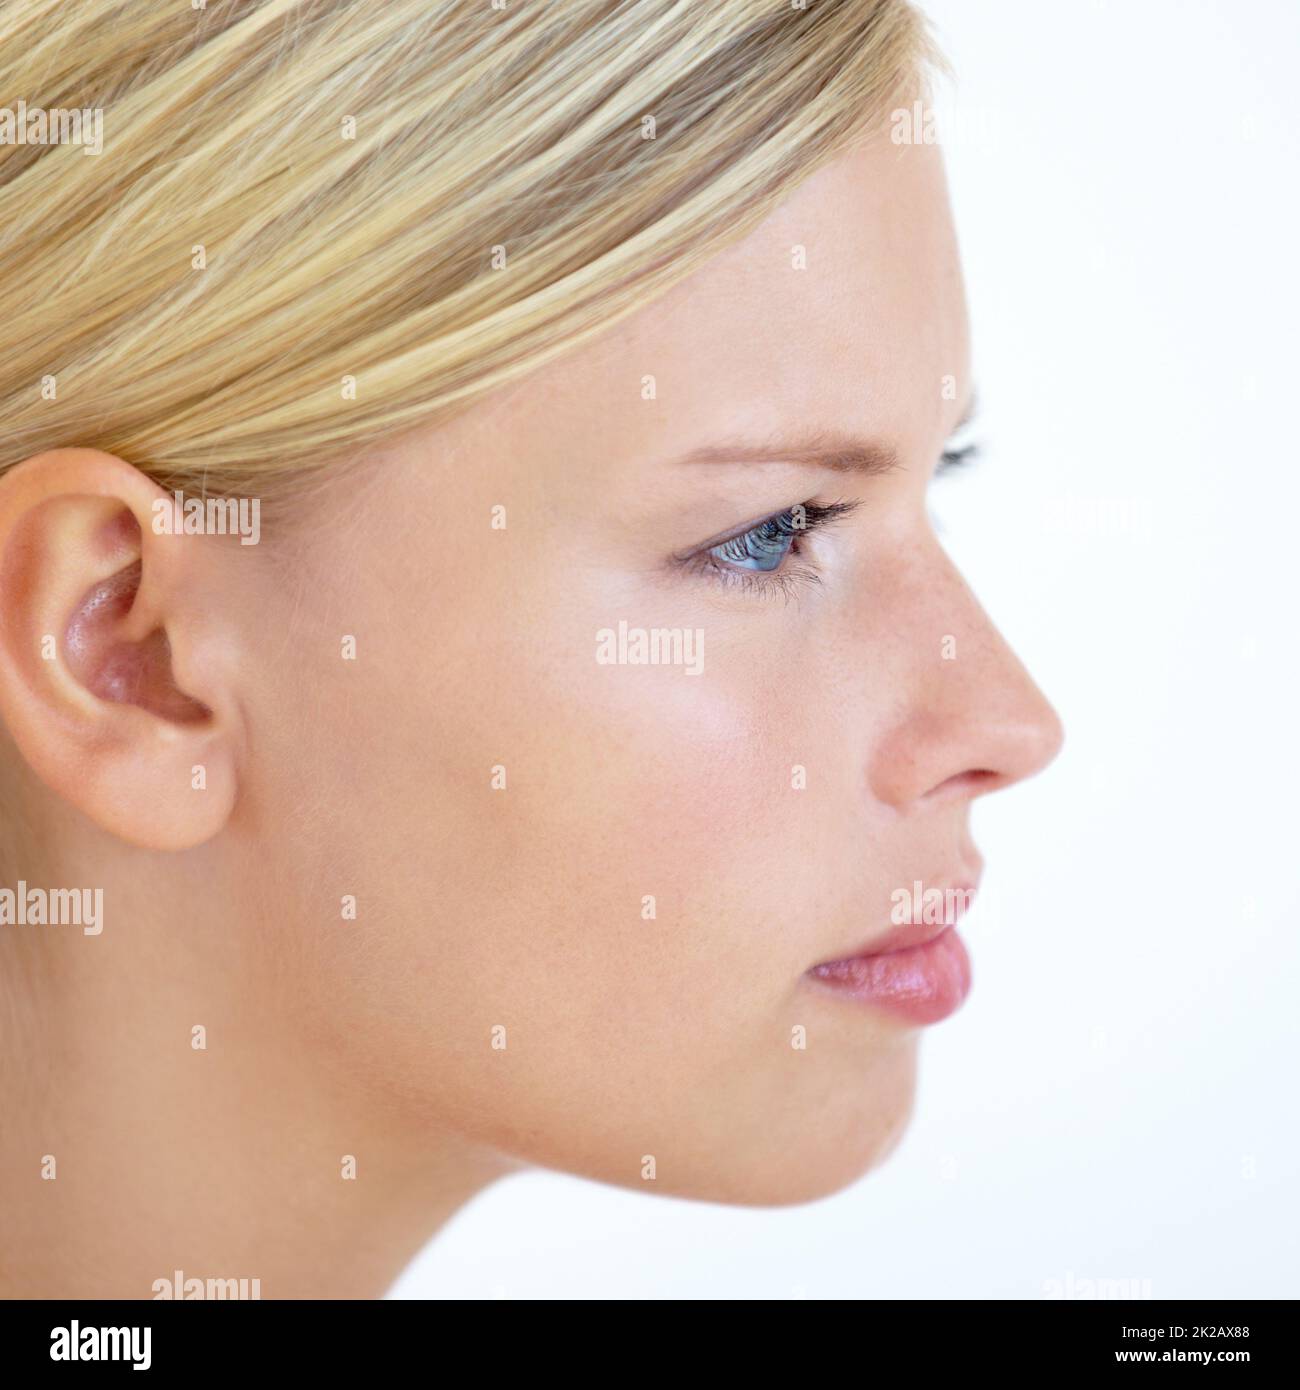 She has a stern presence. Closeup of a young woman looking serious. Stock Photo